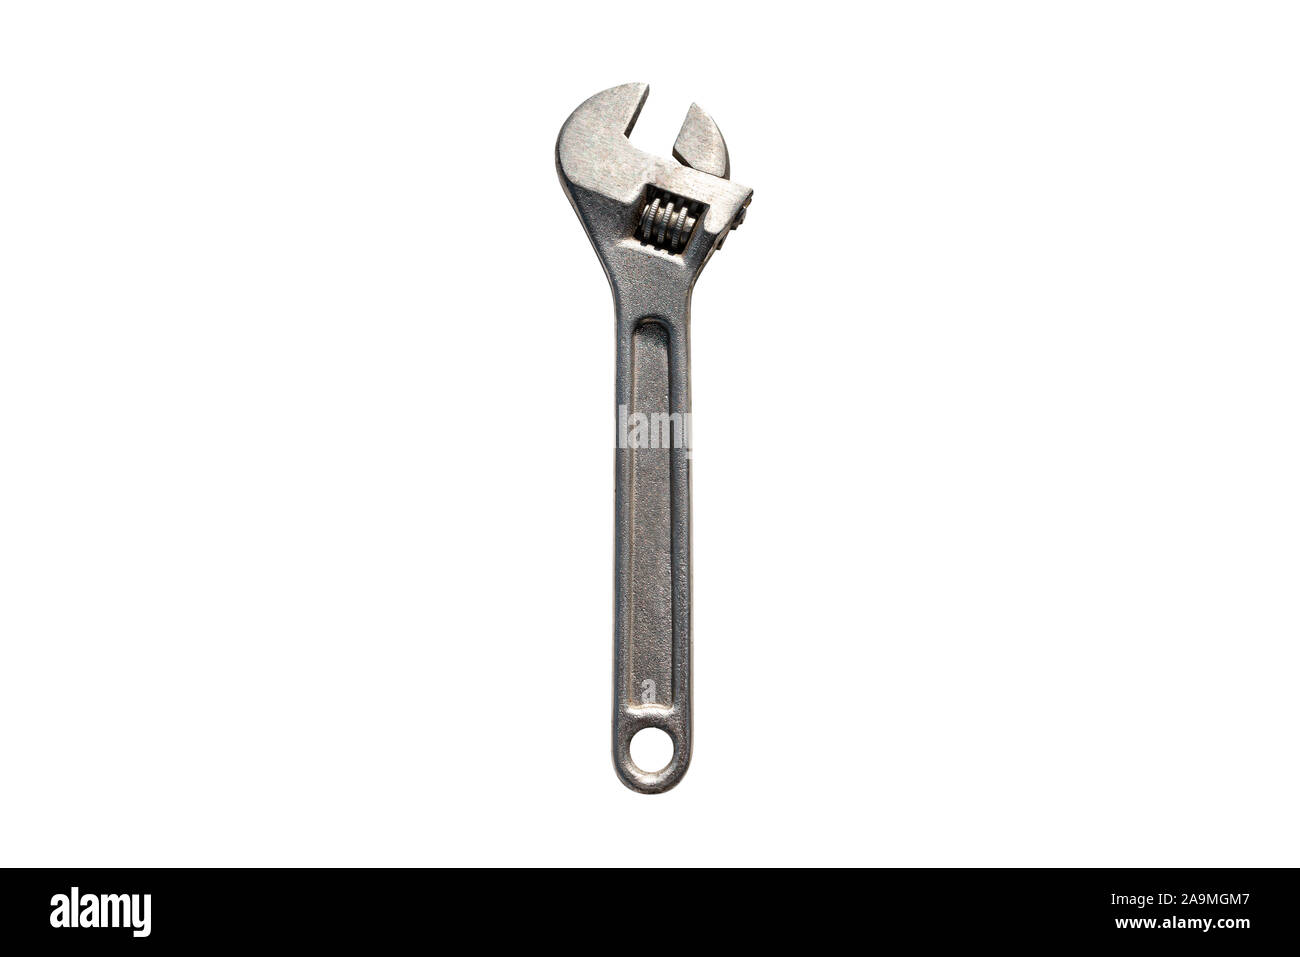 Silver Swedish adjustable wrench, isolated on a white background with a clipping path. Stock Photo